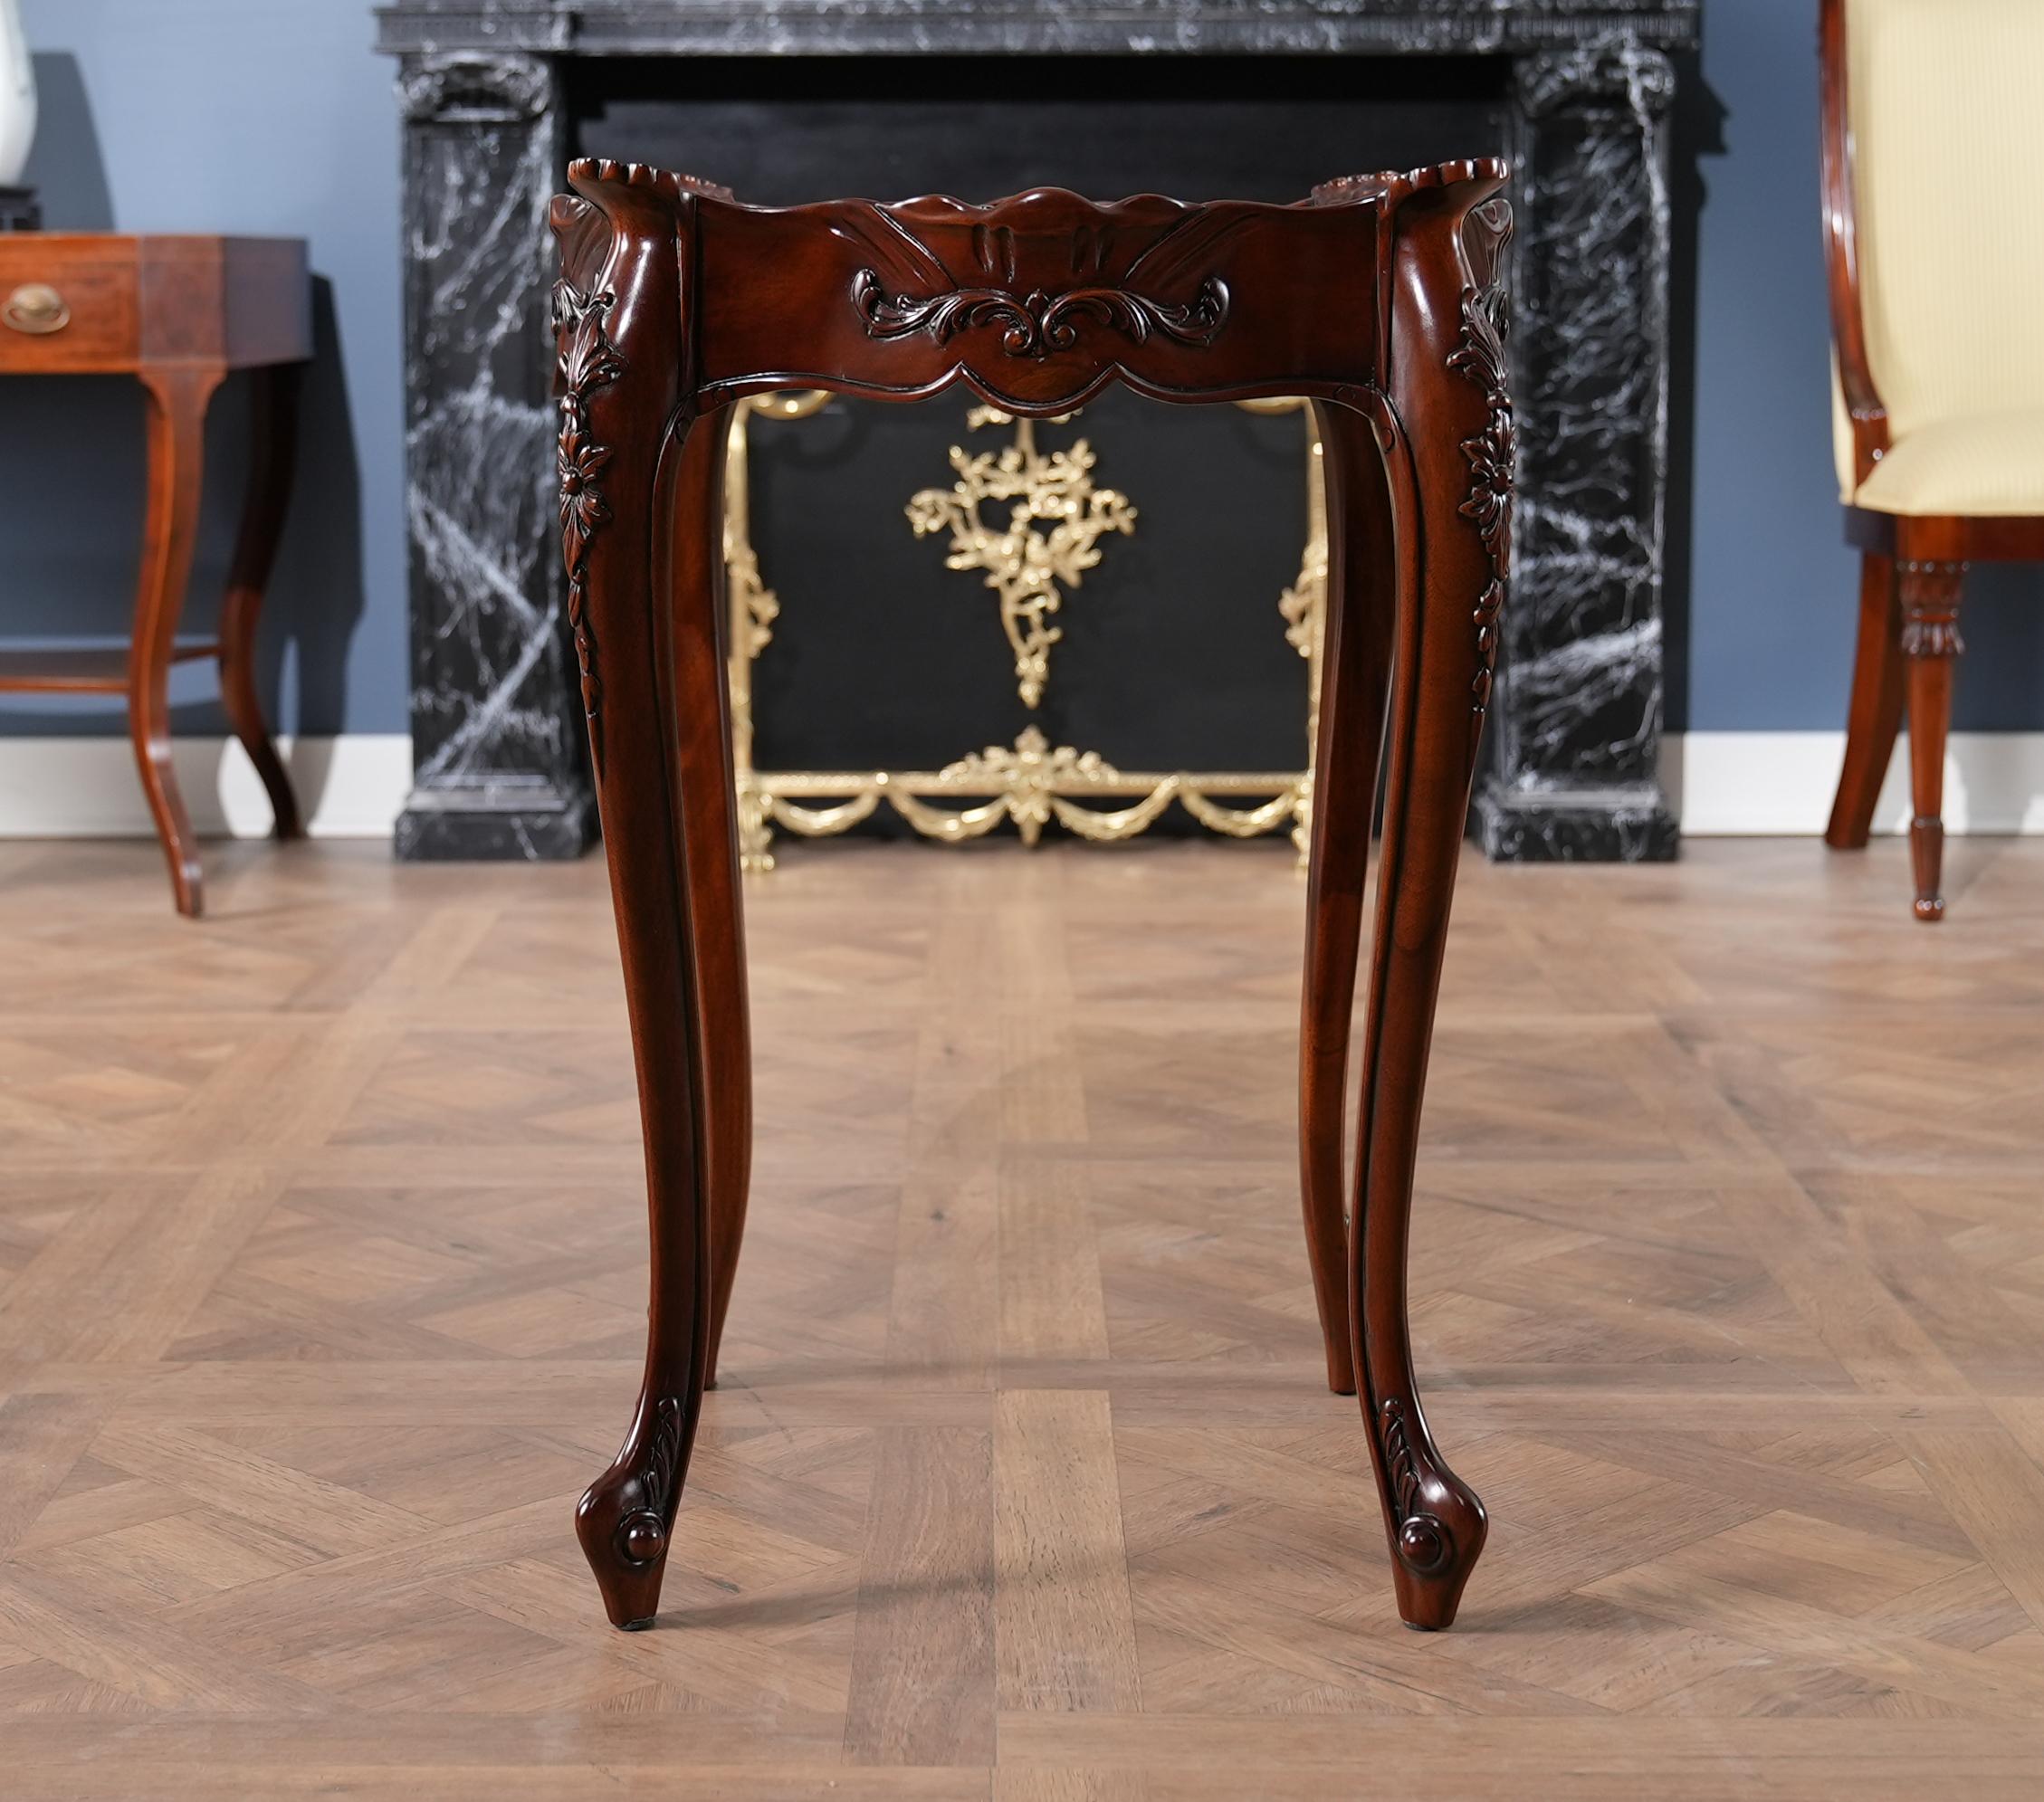 Designed after a 20th Century Classic this French Side Table is a high quality antique reproduction which features fantastic hand carved details all the way from the molding along the top of the table down to the solid mahogany French styled feet.